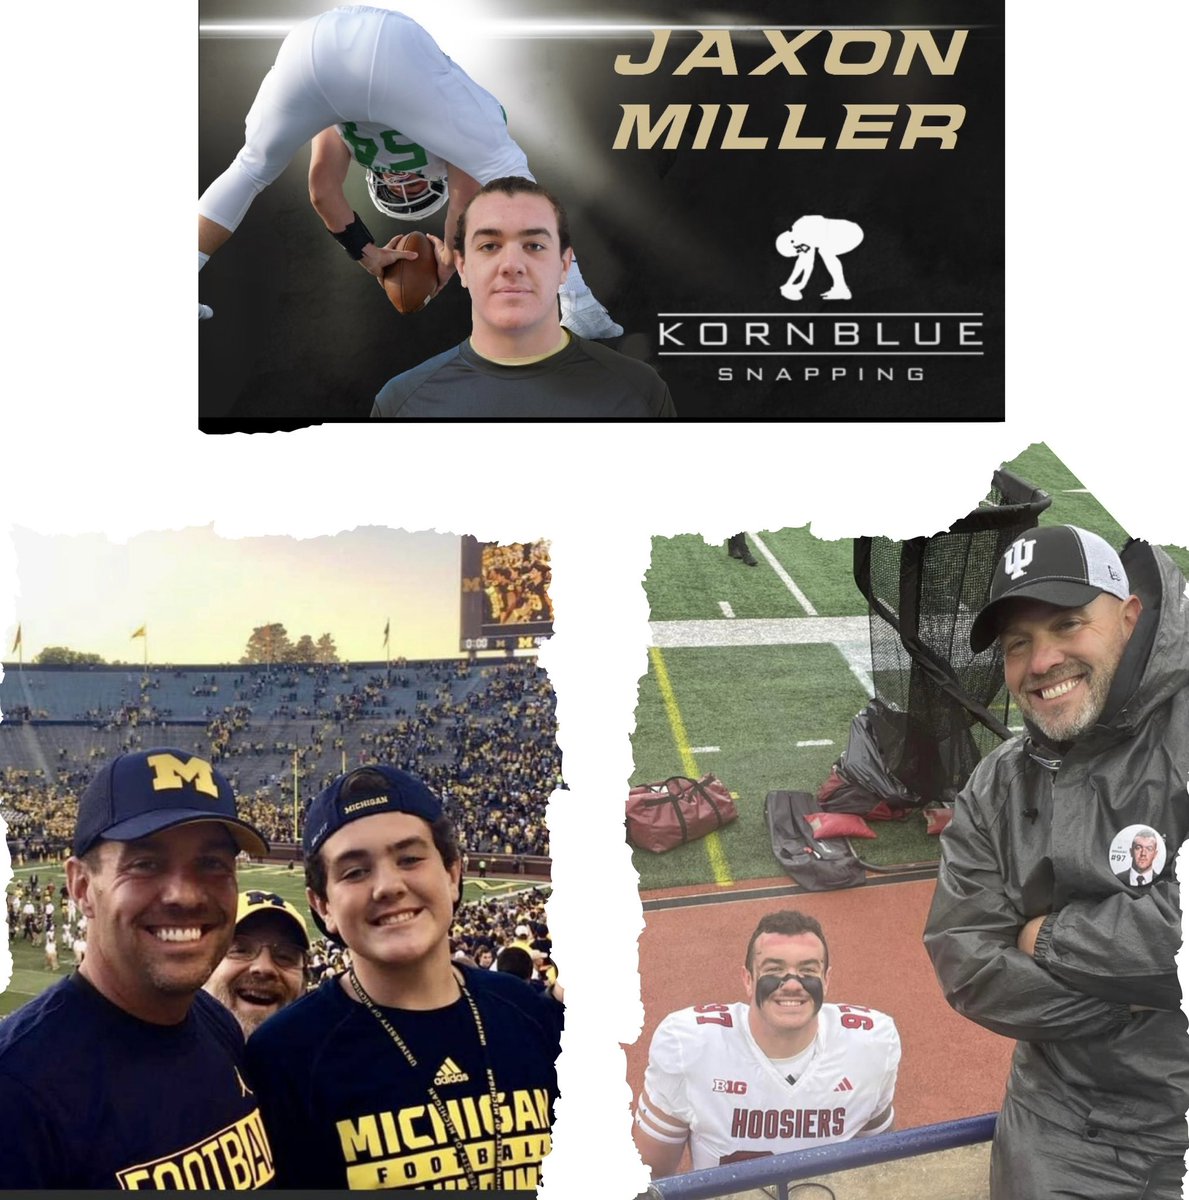 Love seeing dreams turned into reality! 📸 Bottom left: @Jaxon_Miller_54 as a young fan in the Big House. On Saturday, he was on the field as a Hoosier in front of 100,000+ fans. #𝐅𝐀𝐁𝟓𝟎 @CoachAllenIU @KornblueKicking